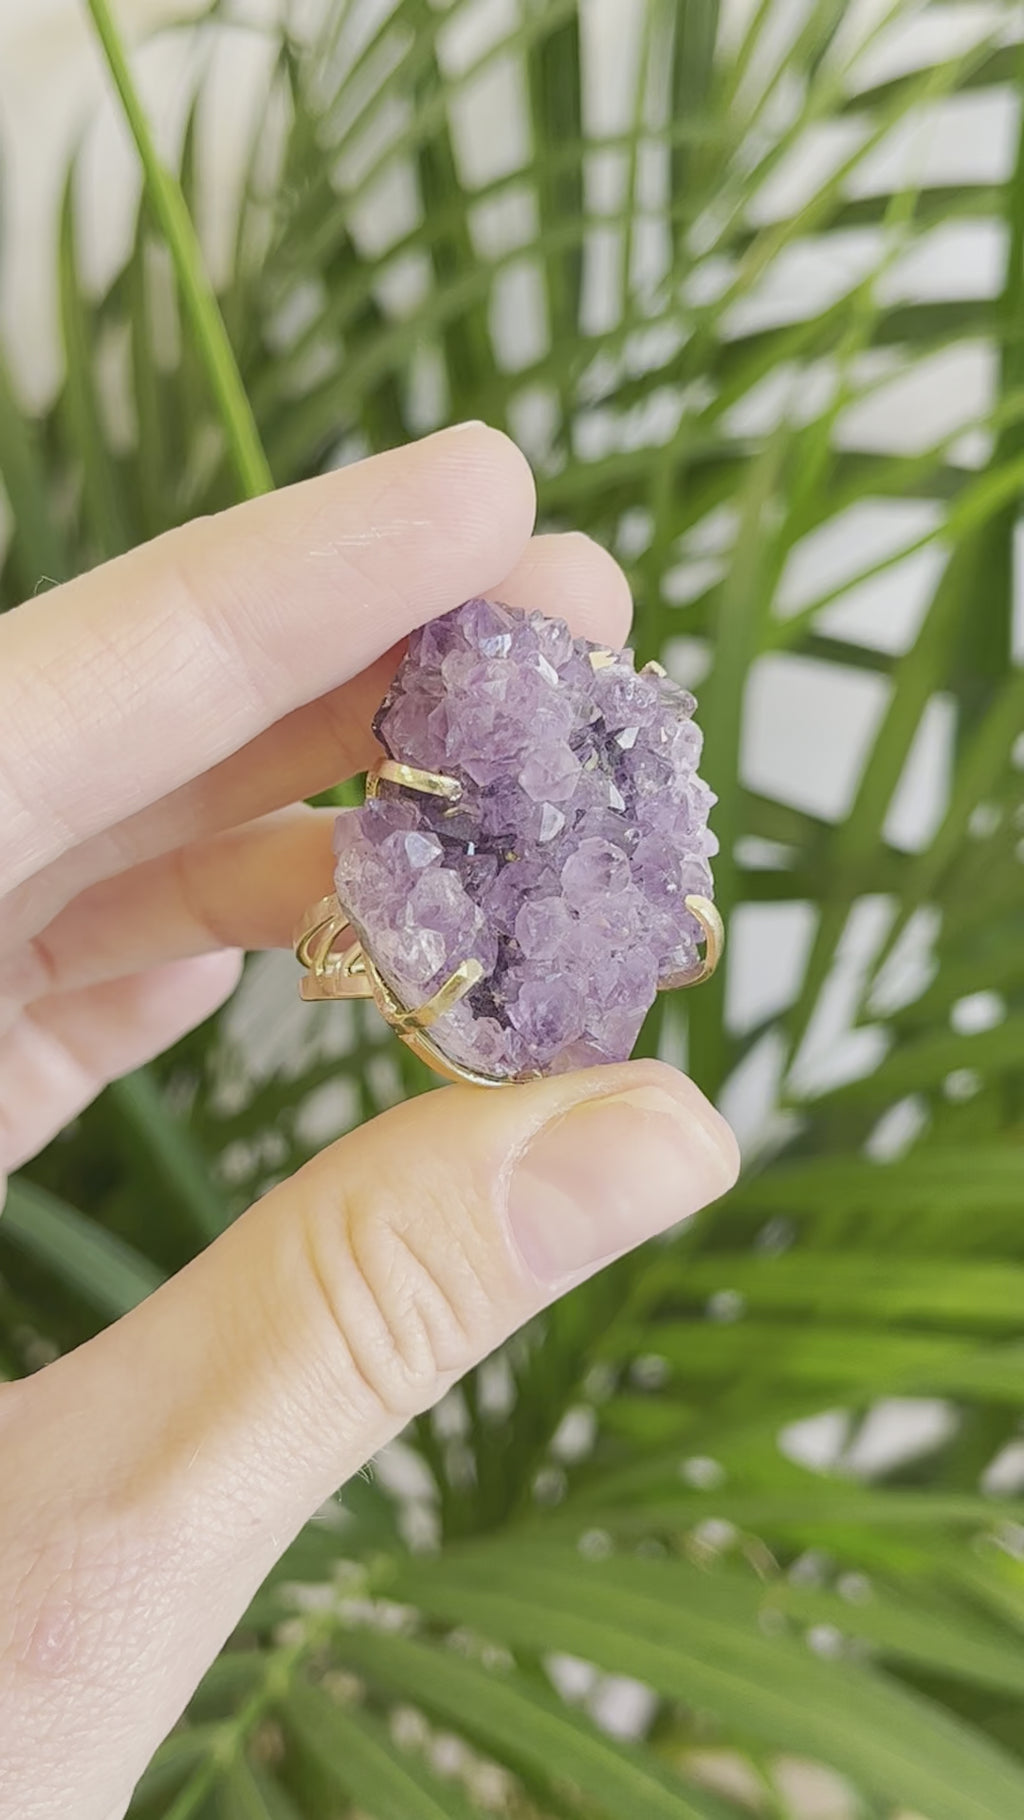 Citrine And Amethyst Together: Meaning & Benefits - Crystal Healing Ritual